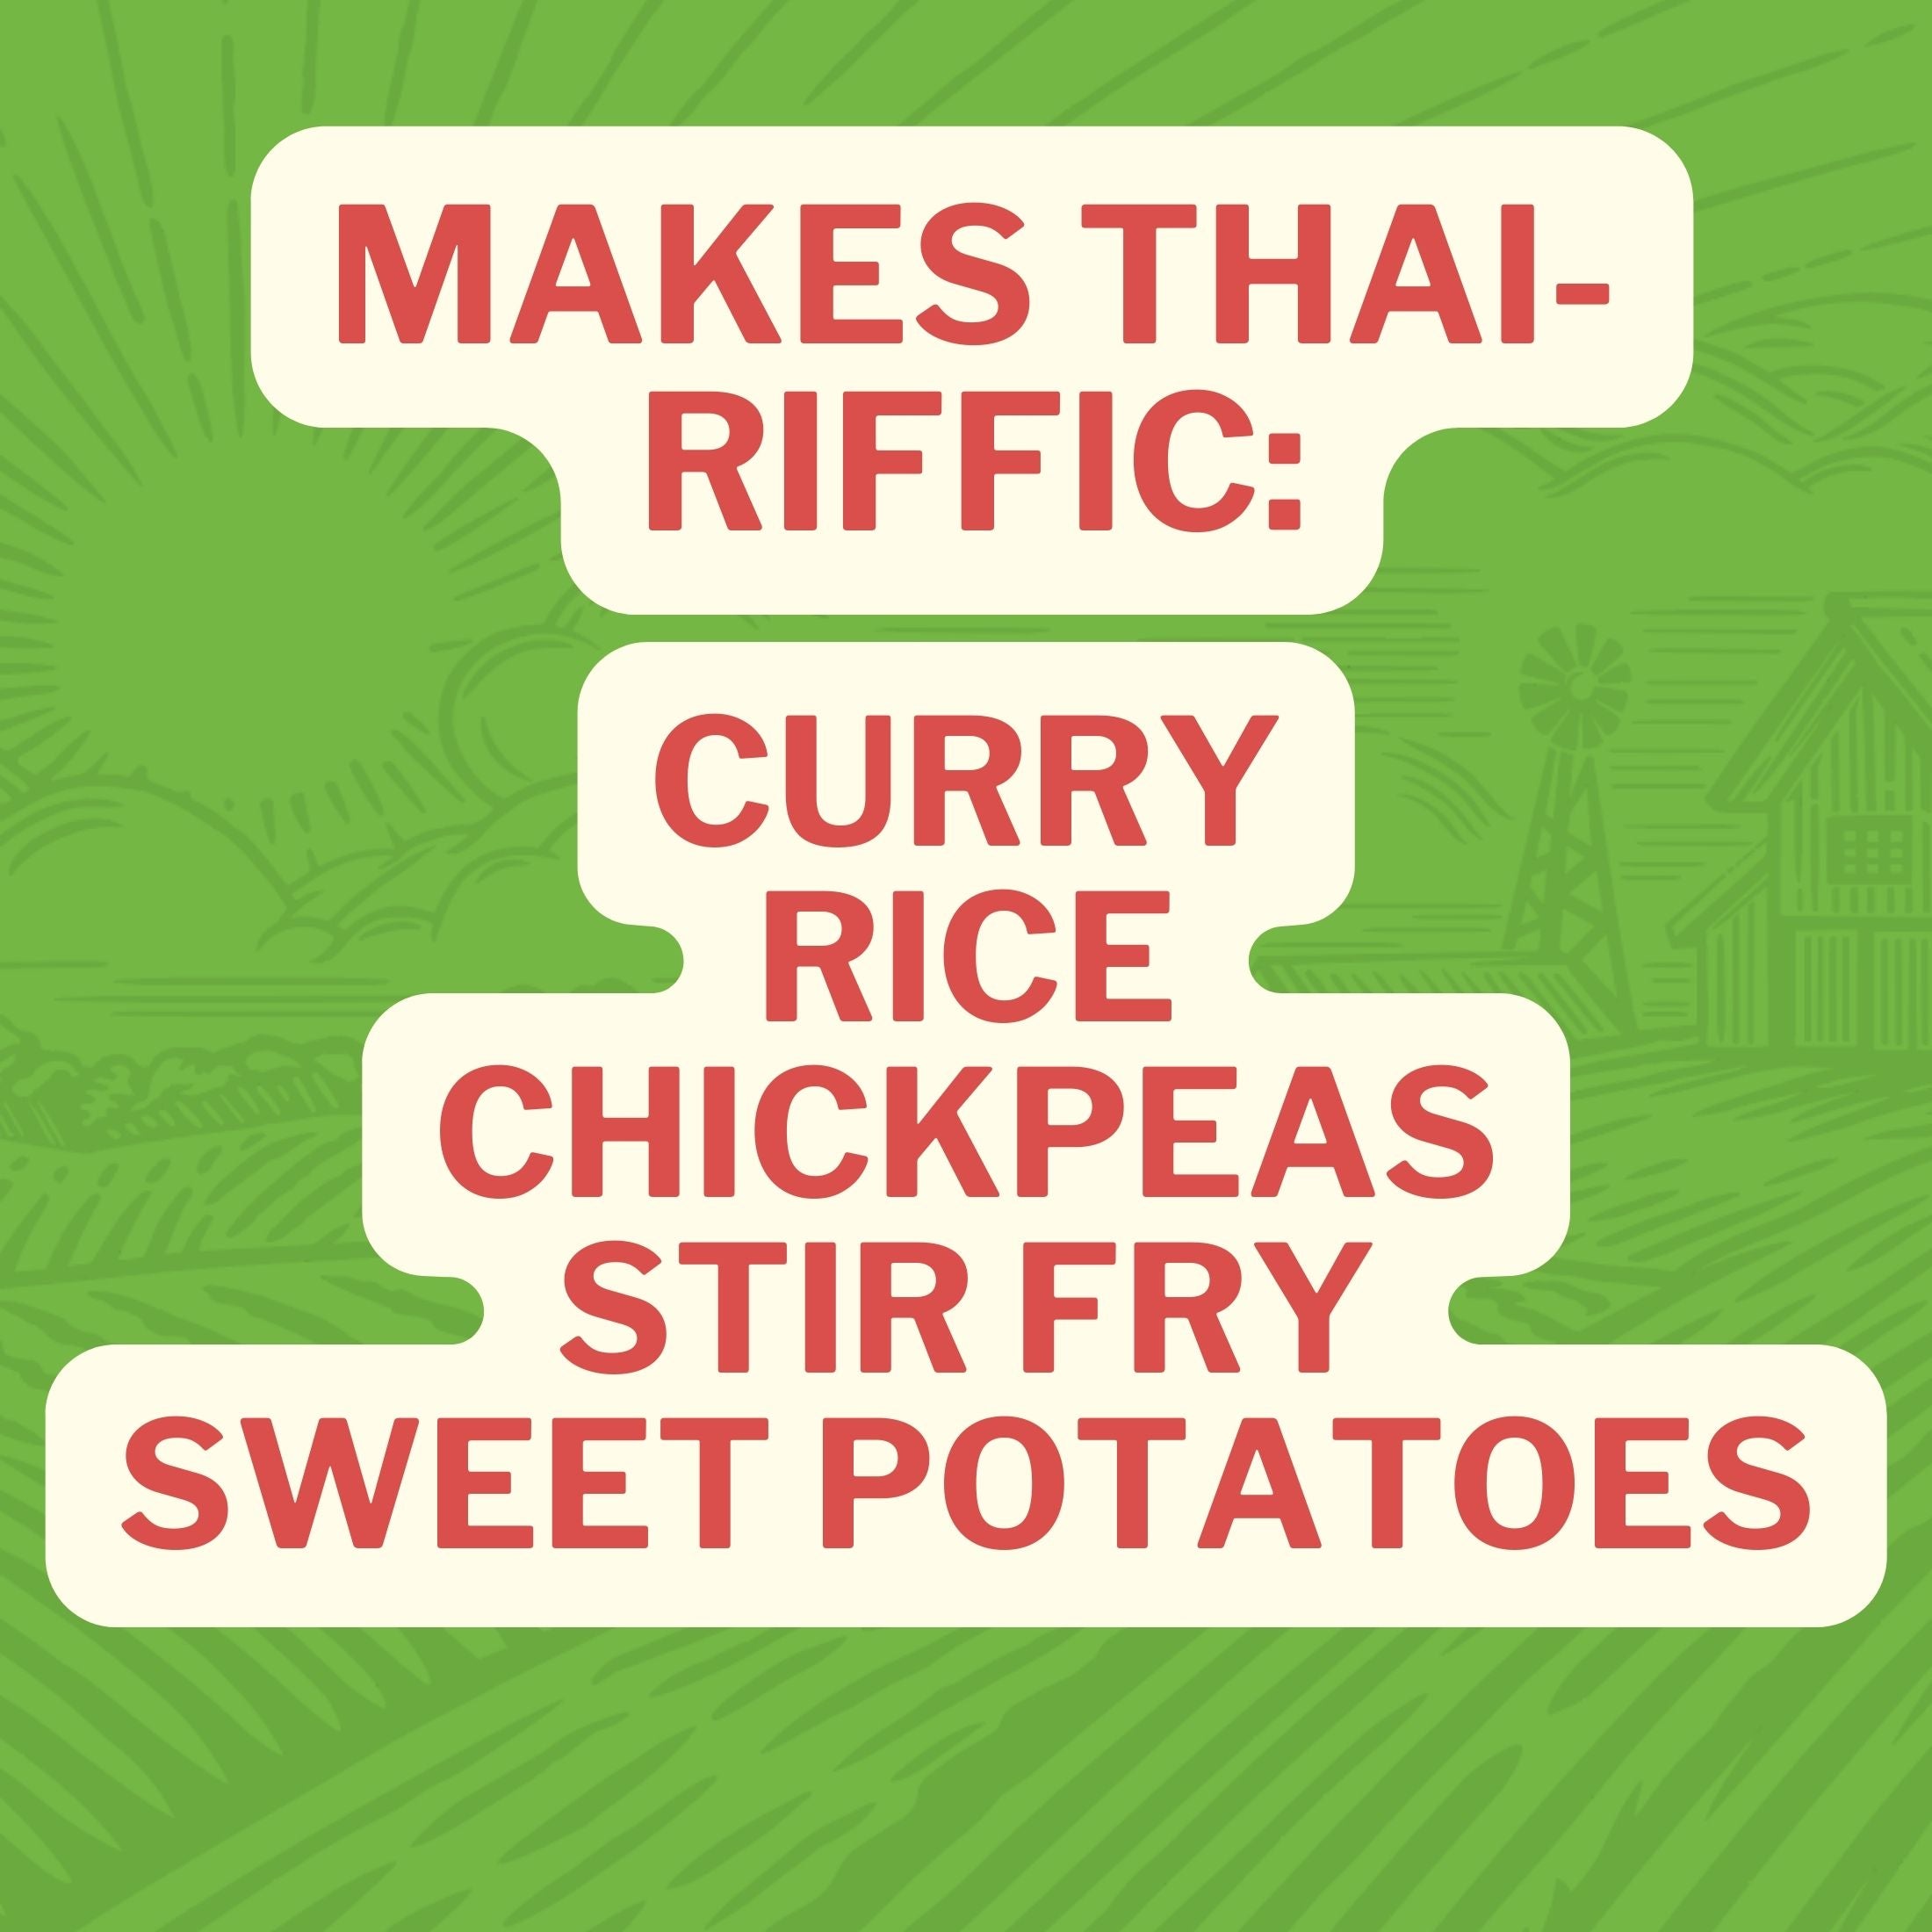 Makes Thai-riffic: Curry Rice Sauces Chickpeas Stir Fry Sweet Potatoes